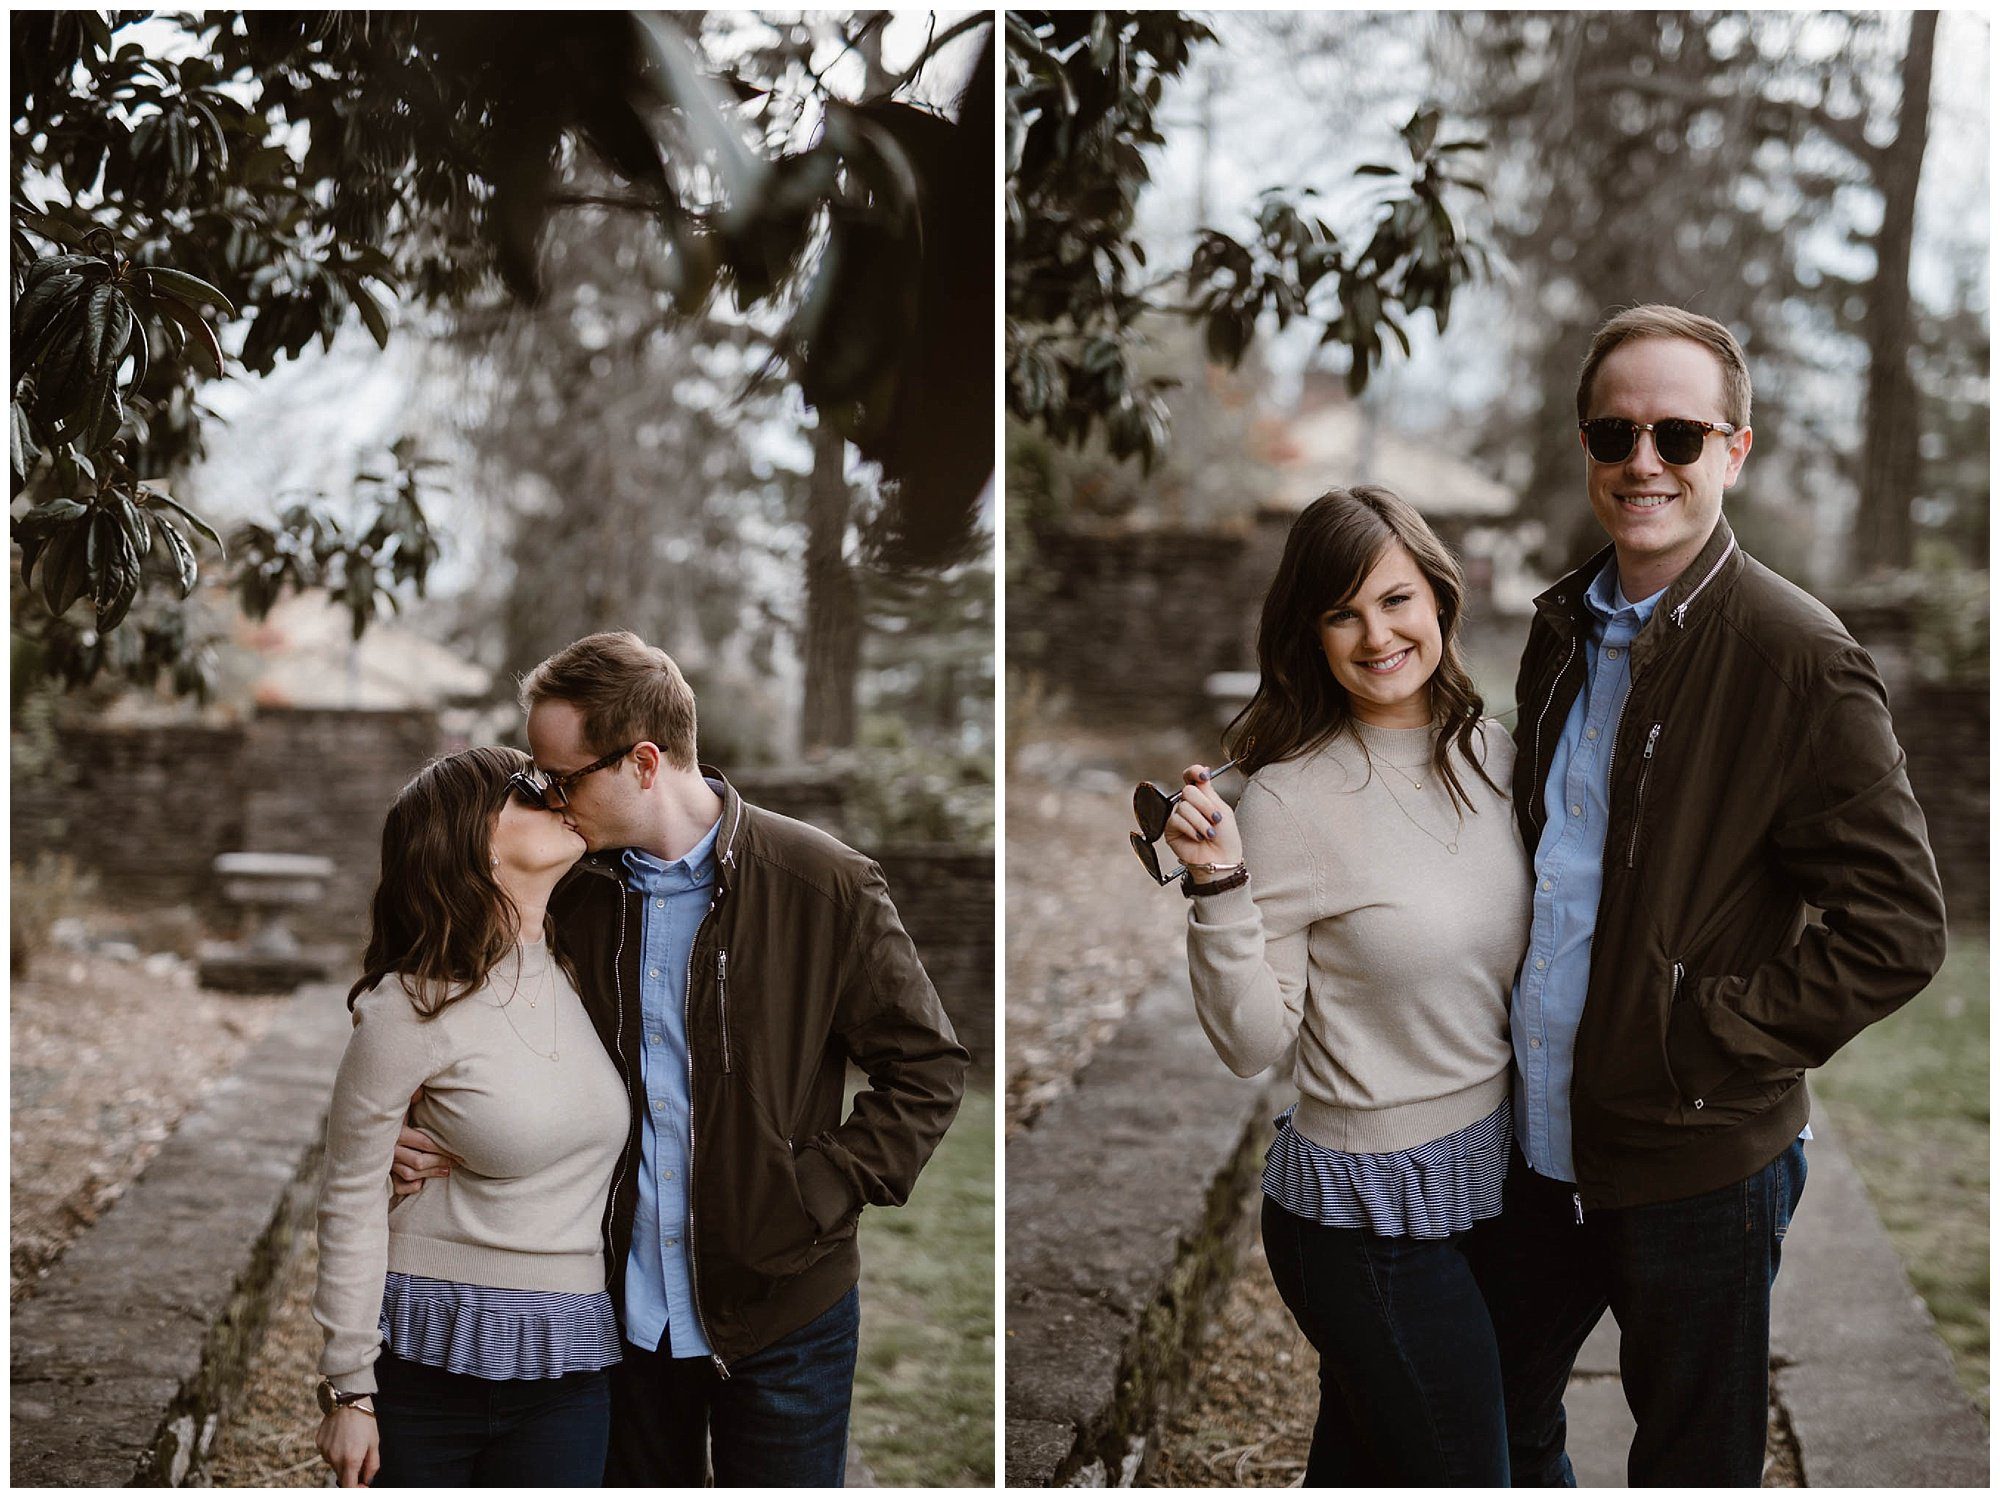 Engagement photos at the Knoxville Botanical Garden in Knoxville